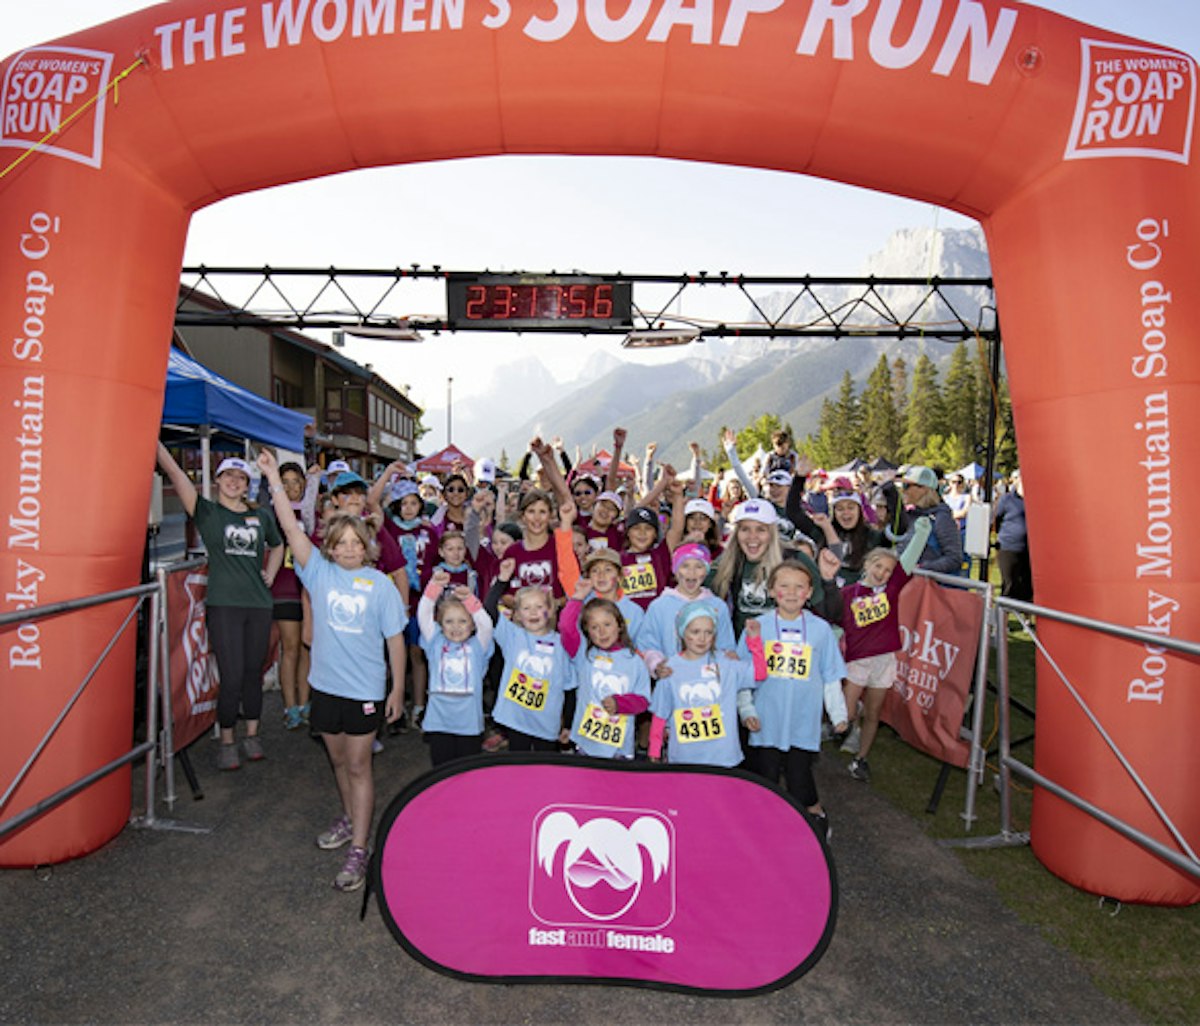 A group of participants celebrating at the finish line of the women's soap run event.